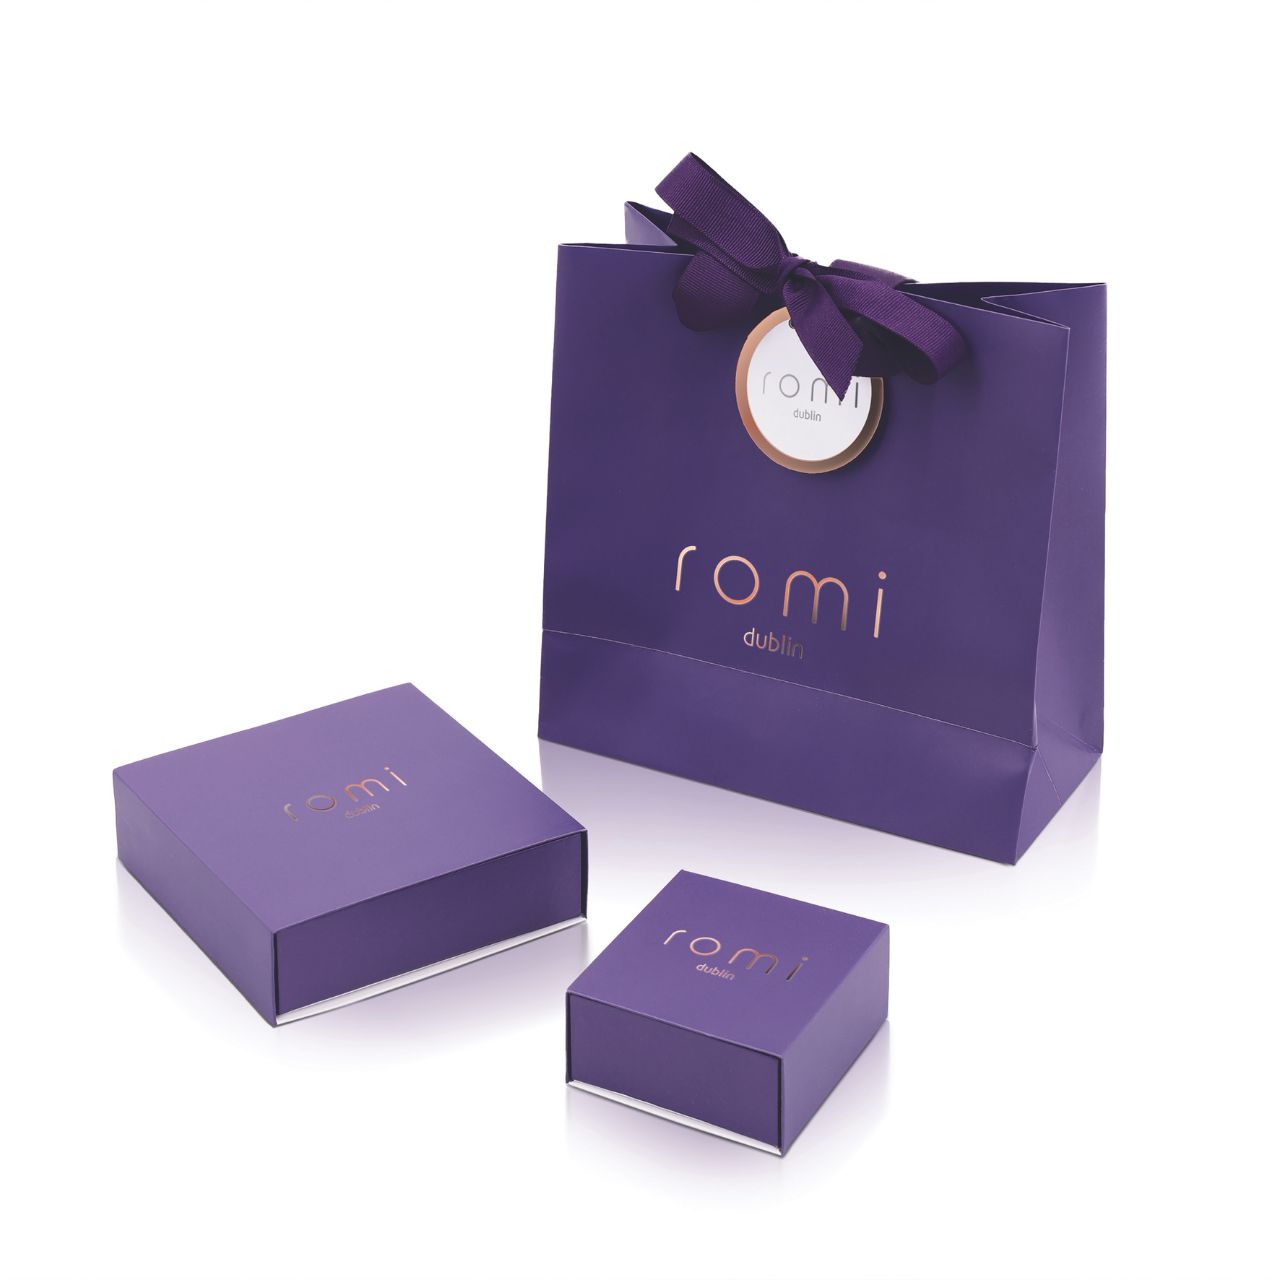 Romi Dublin Silver Chain Bar Necklace  This easy-to-wear jewellery collection was inspired by daughter Romi who loves to style and accessorise. An outfit isn’t complete until the perfect pieces of jewellery and accessories have been selected to enhance it.